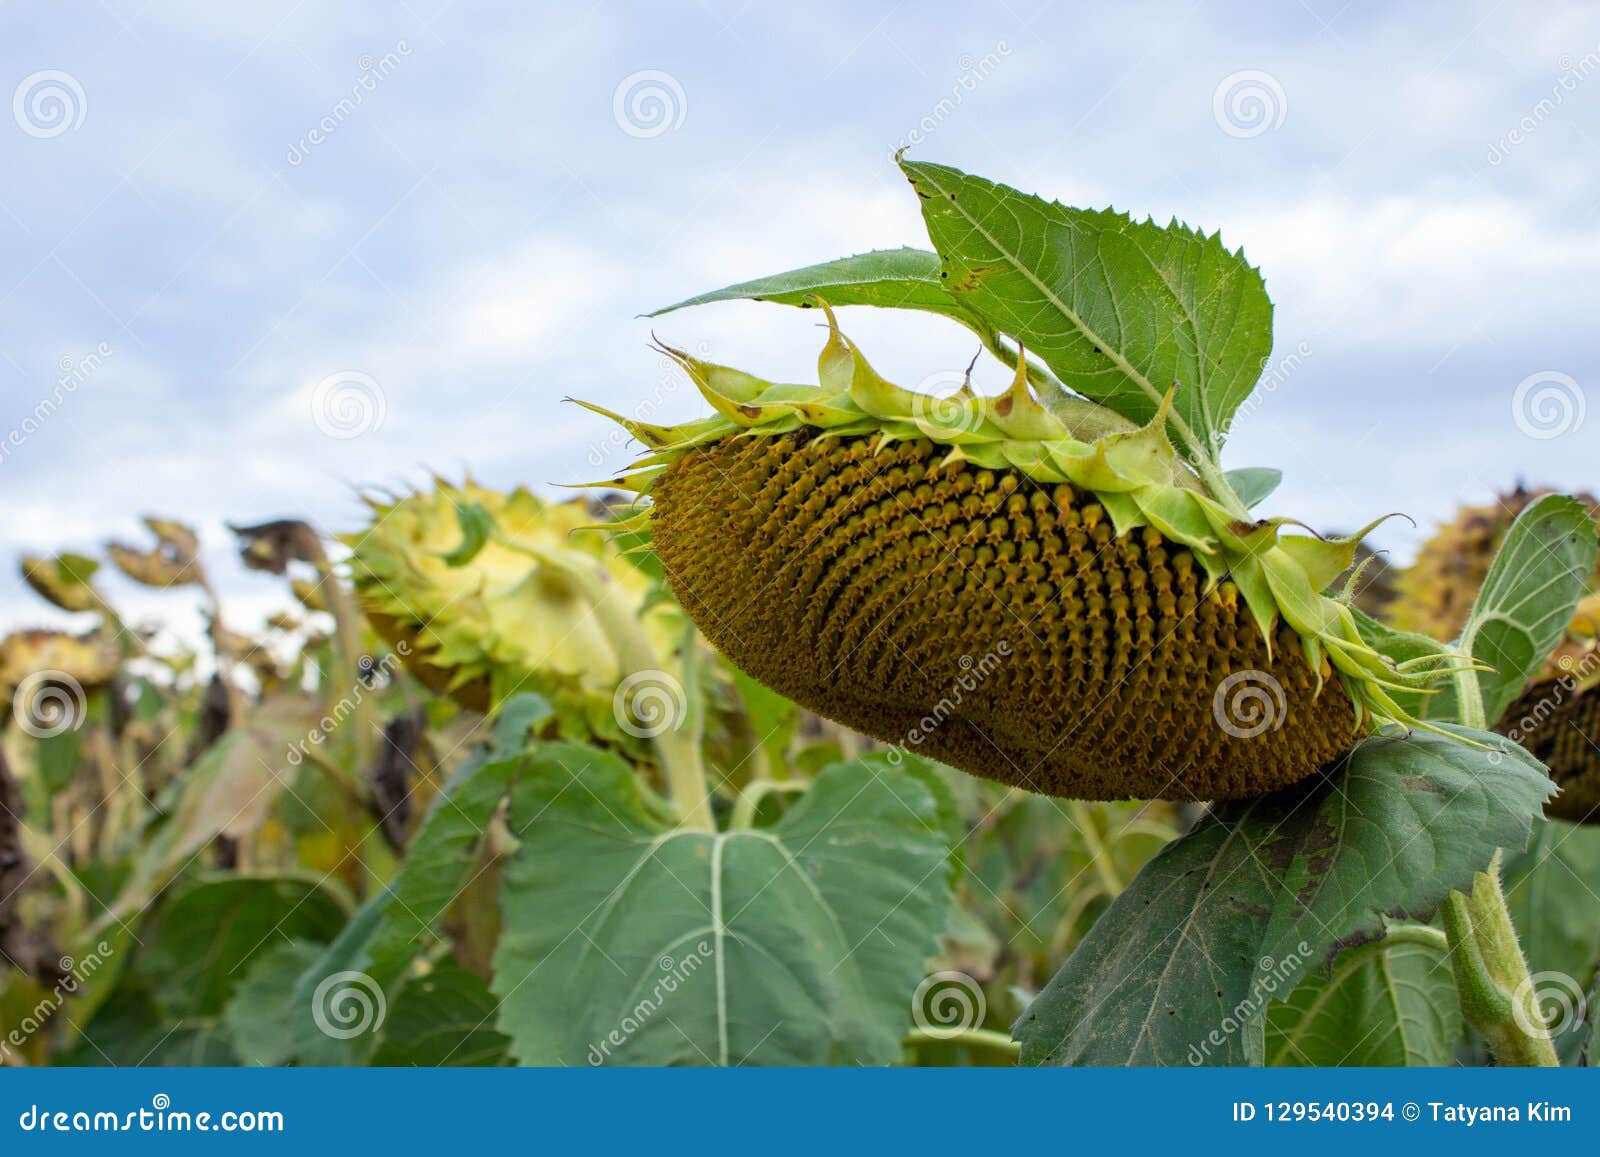 Sunflower Harvest, Riped Sunflowers in the Field Stock Photo - Image of ...